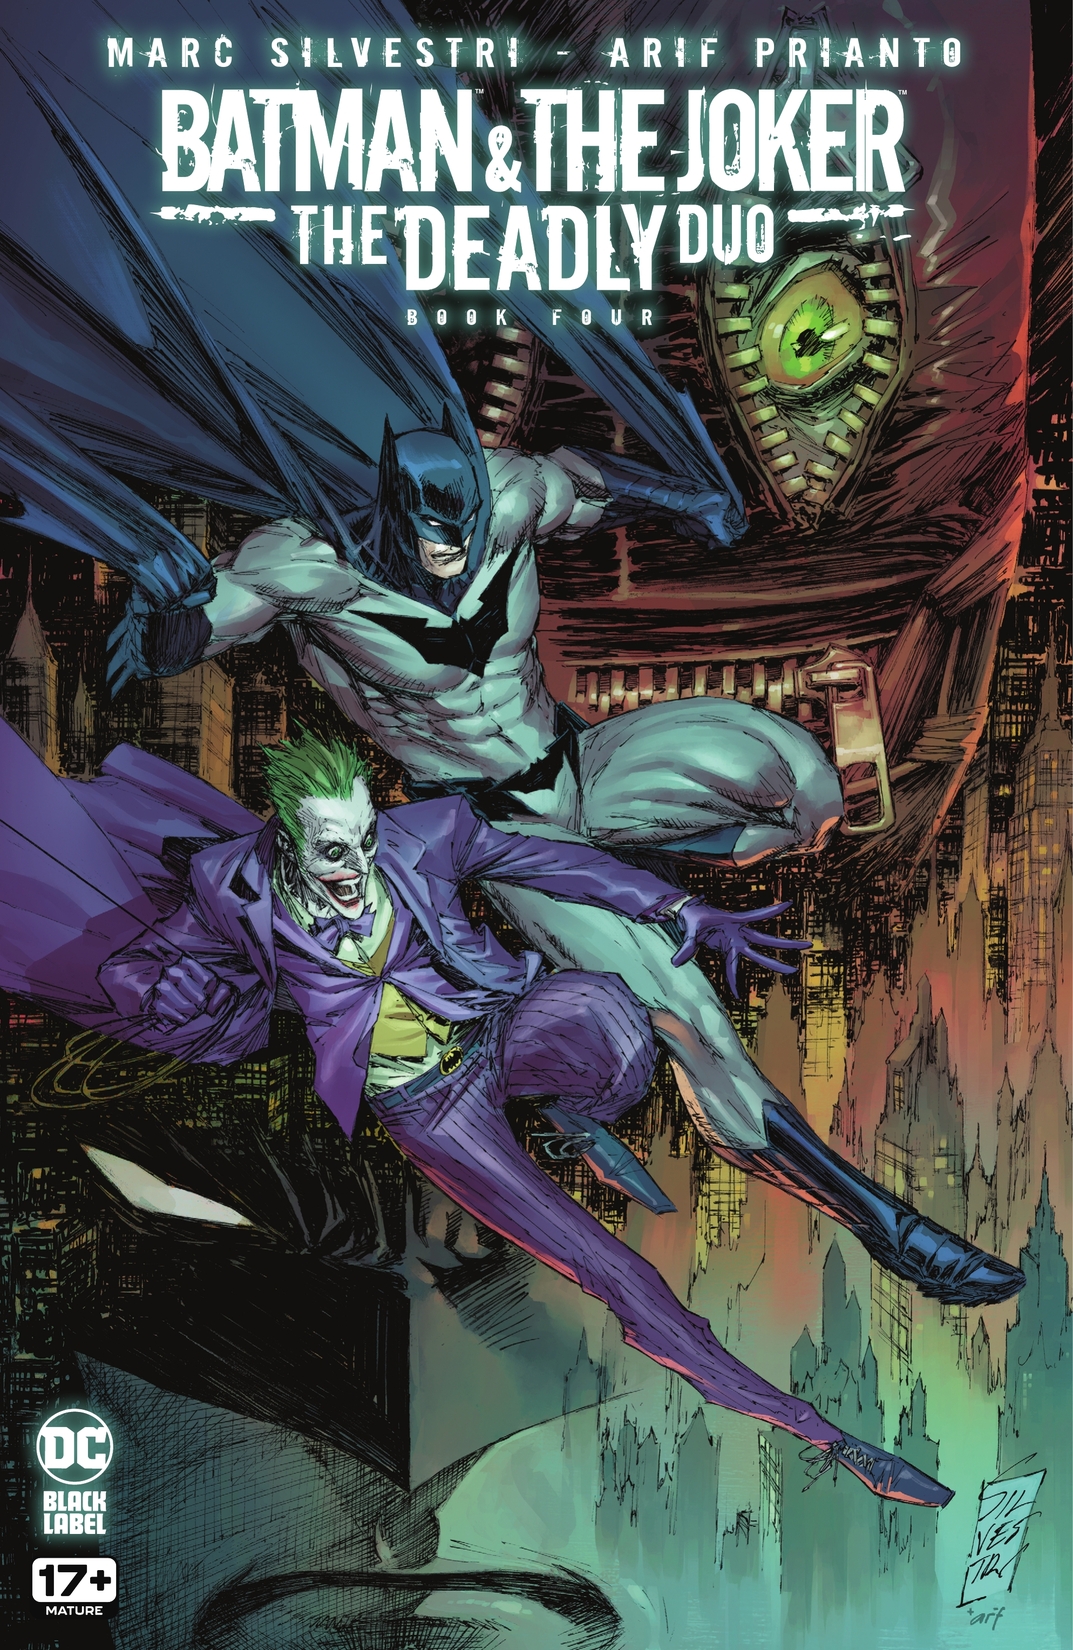 Batman & The Joker: The Deadly Duo #4 preview images